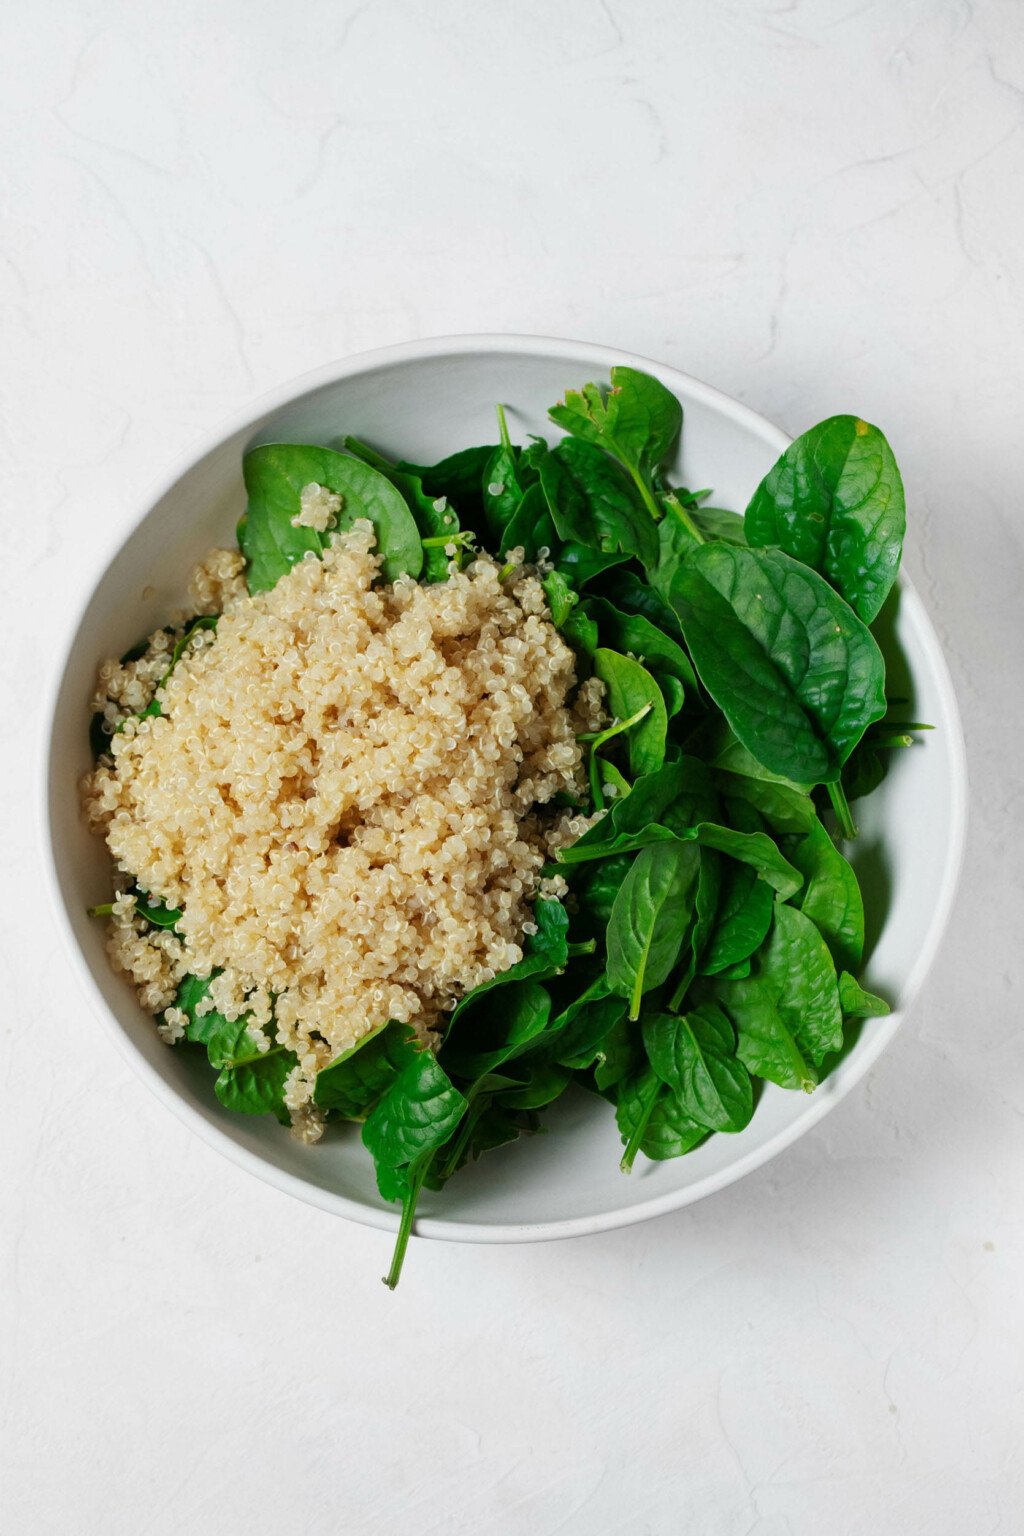 A white bowl is filled with cooked quinoa and baby spinach leaves.